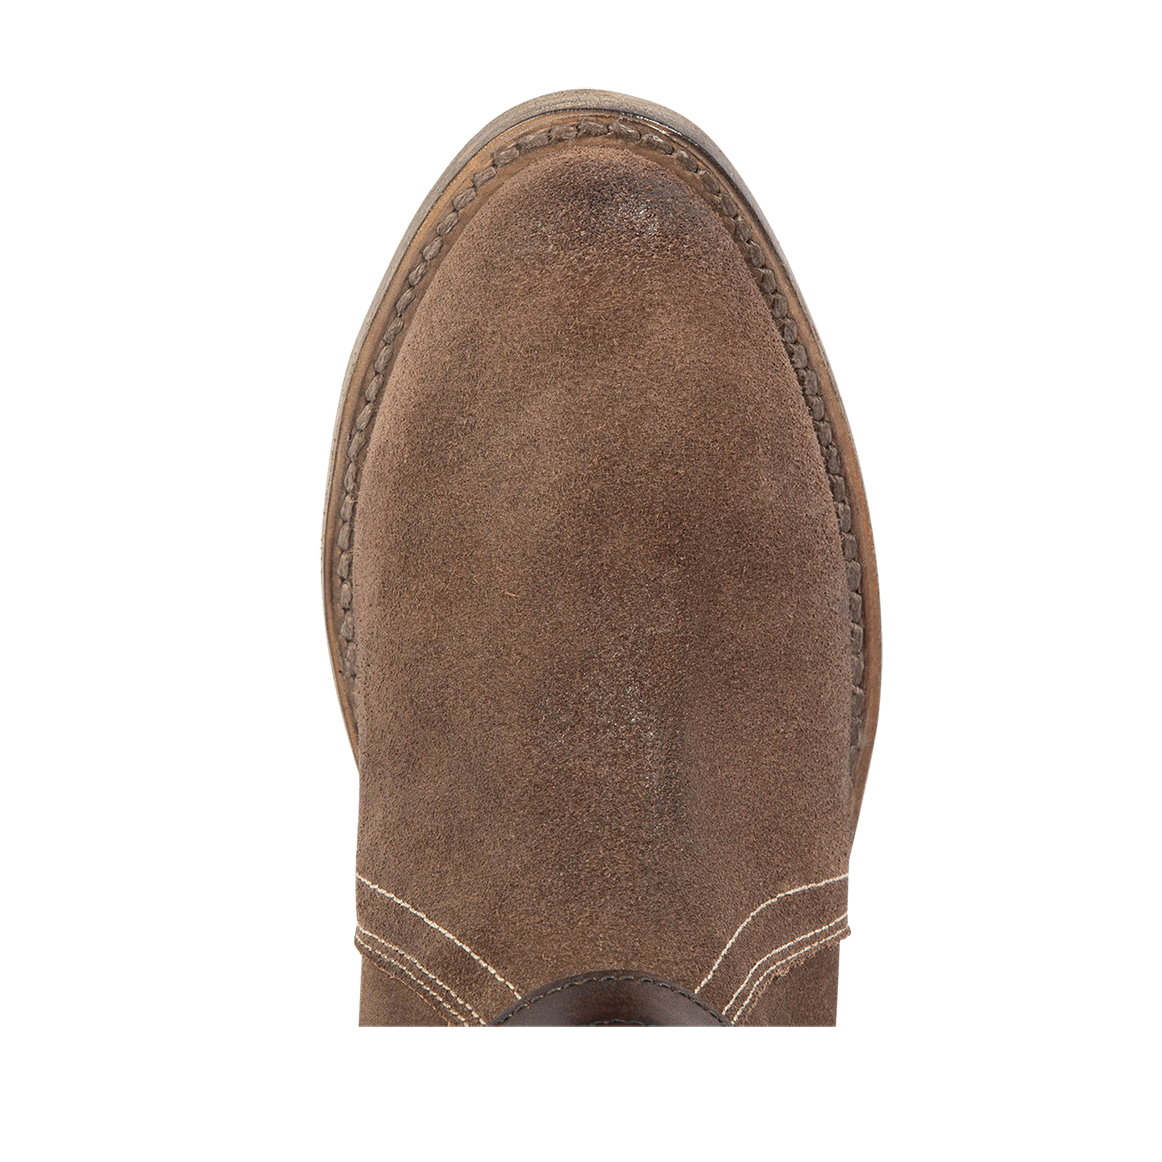 Top view showing almond shoe toe on FREEBIRD women's Shiloh grey suede leather ankle bootie